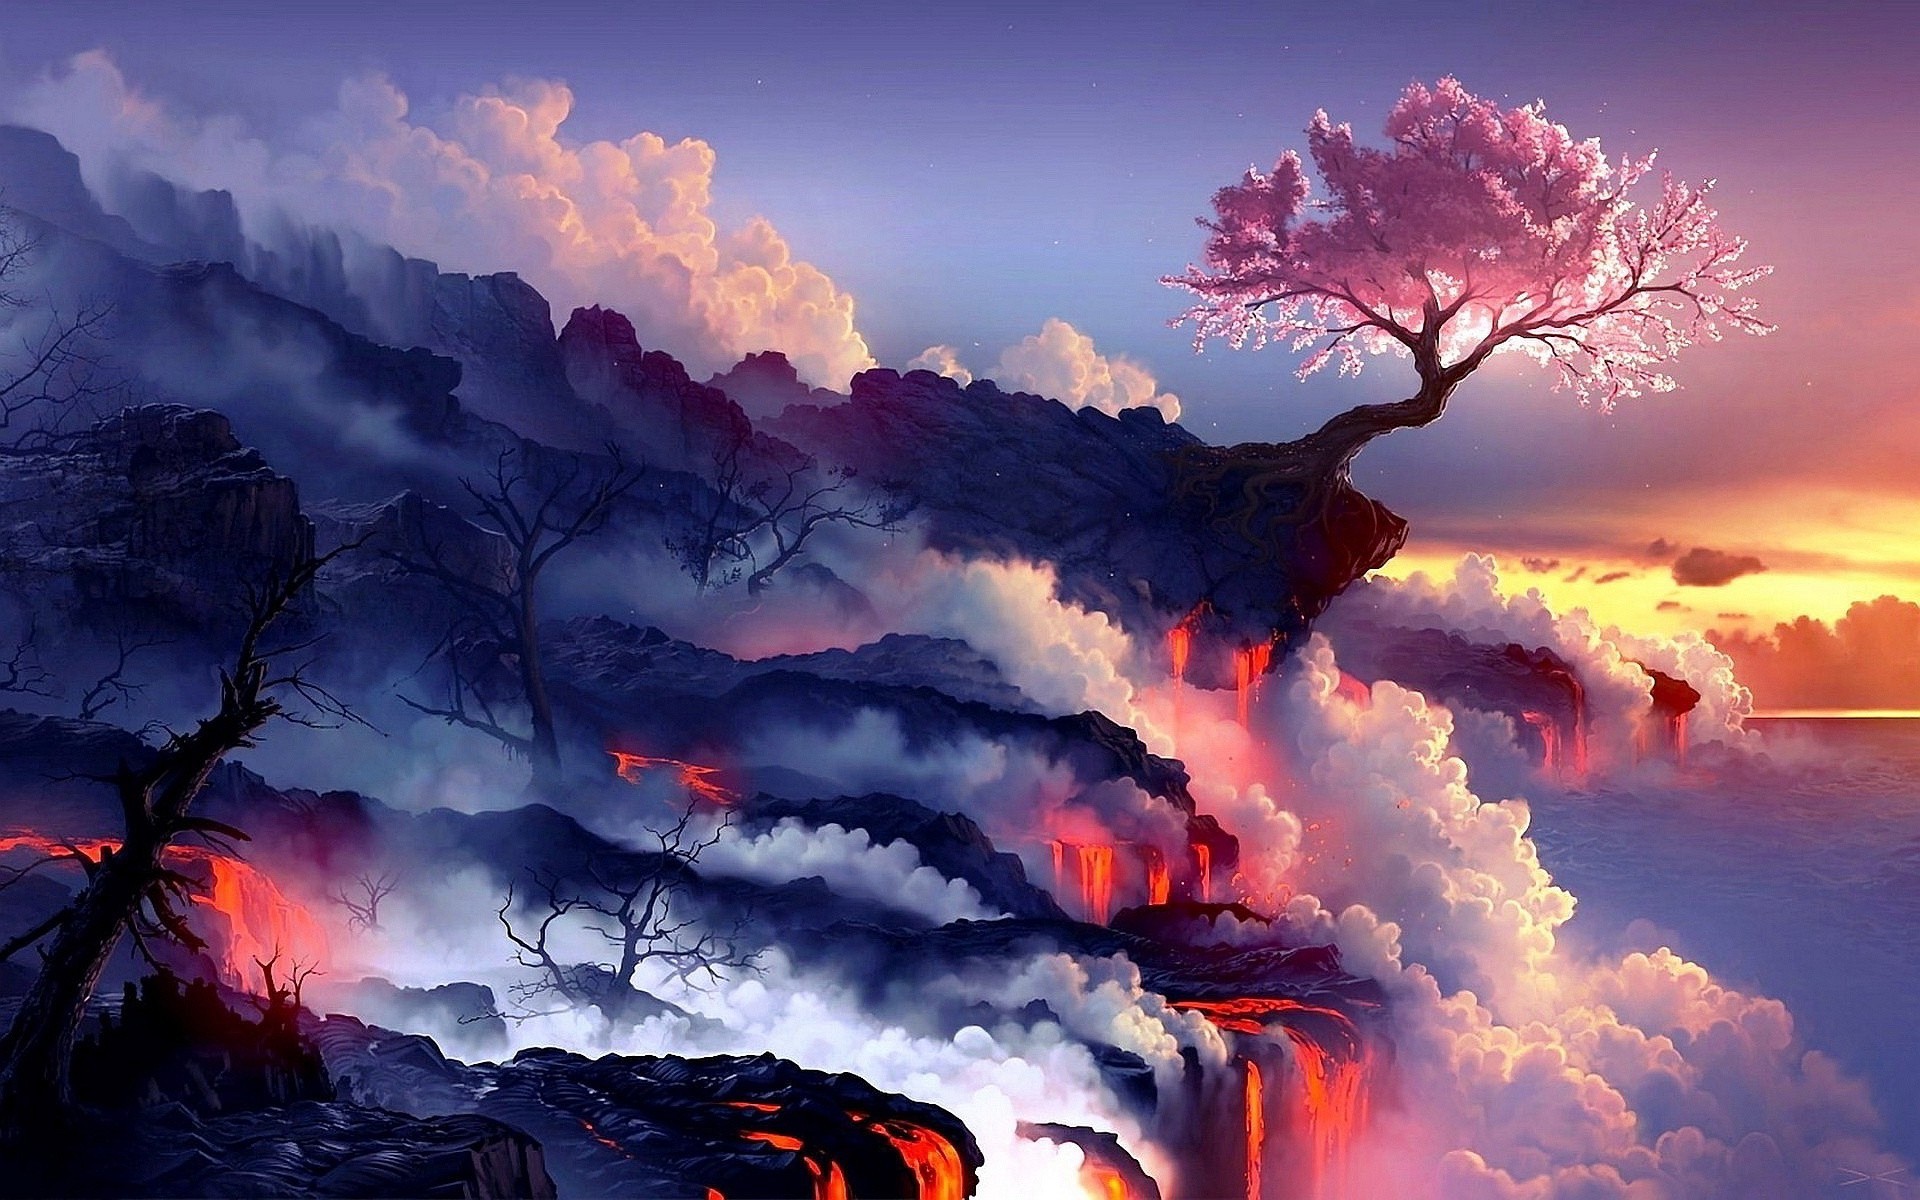 The Best Wallpapers for Desktop (72+ images)